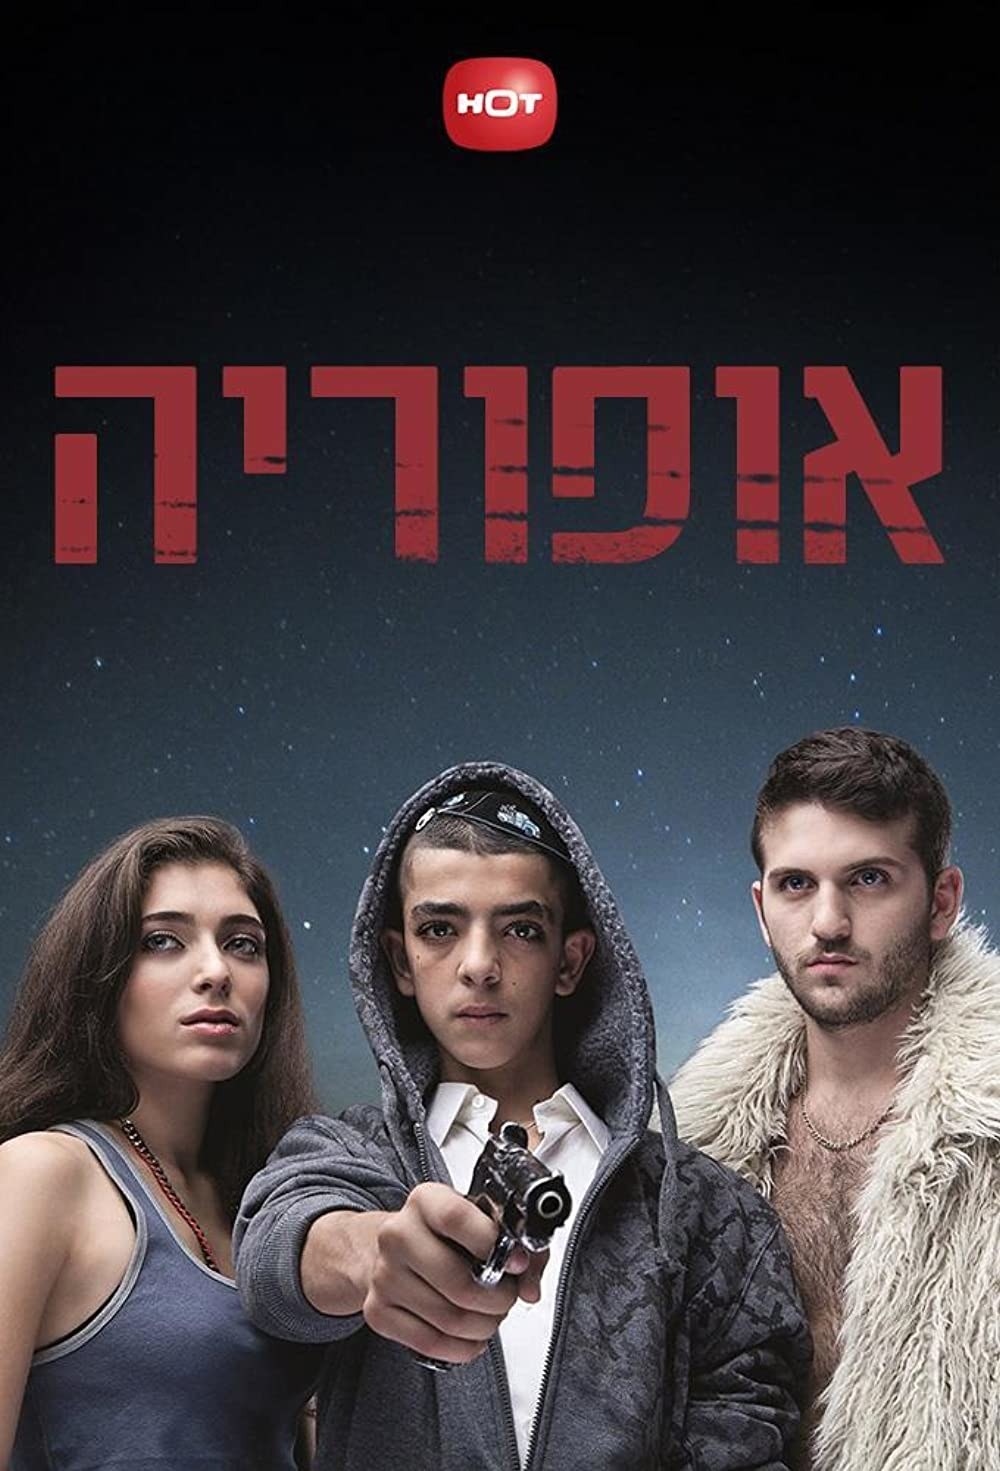 Poster of Euphoria written in Hebrew with Hofit, Tomer, who is holding a gun, and Elkana